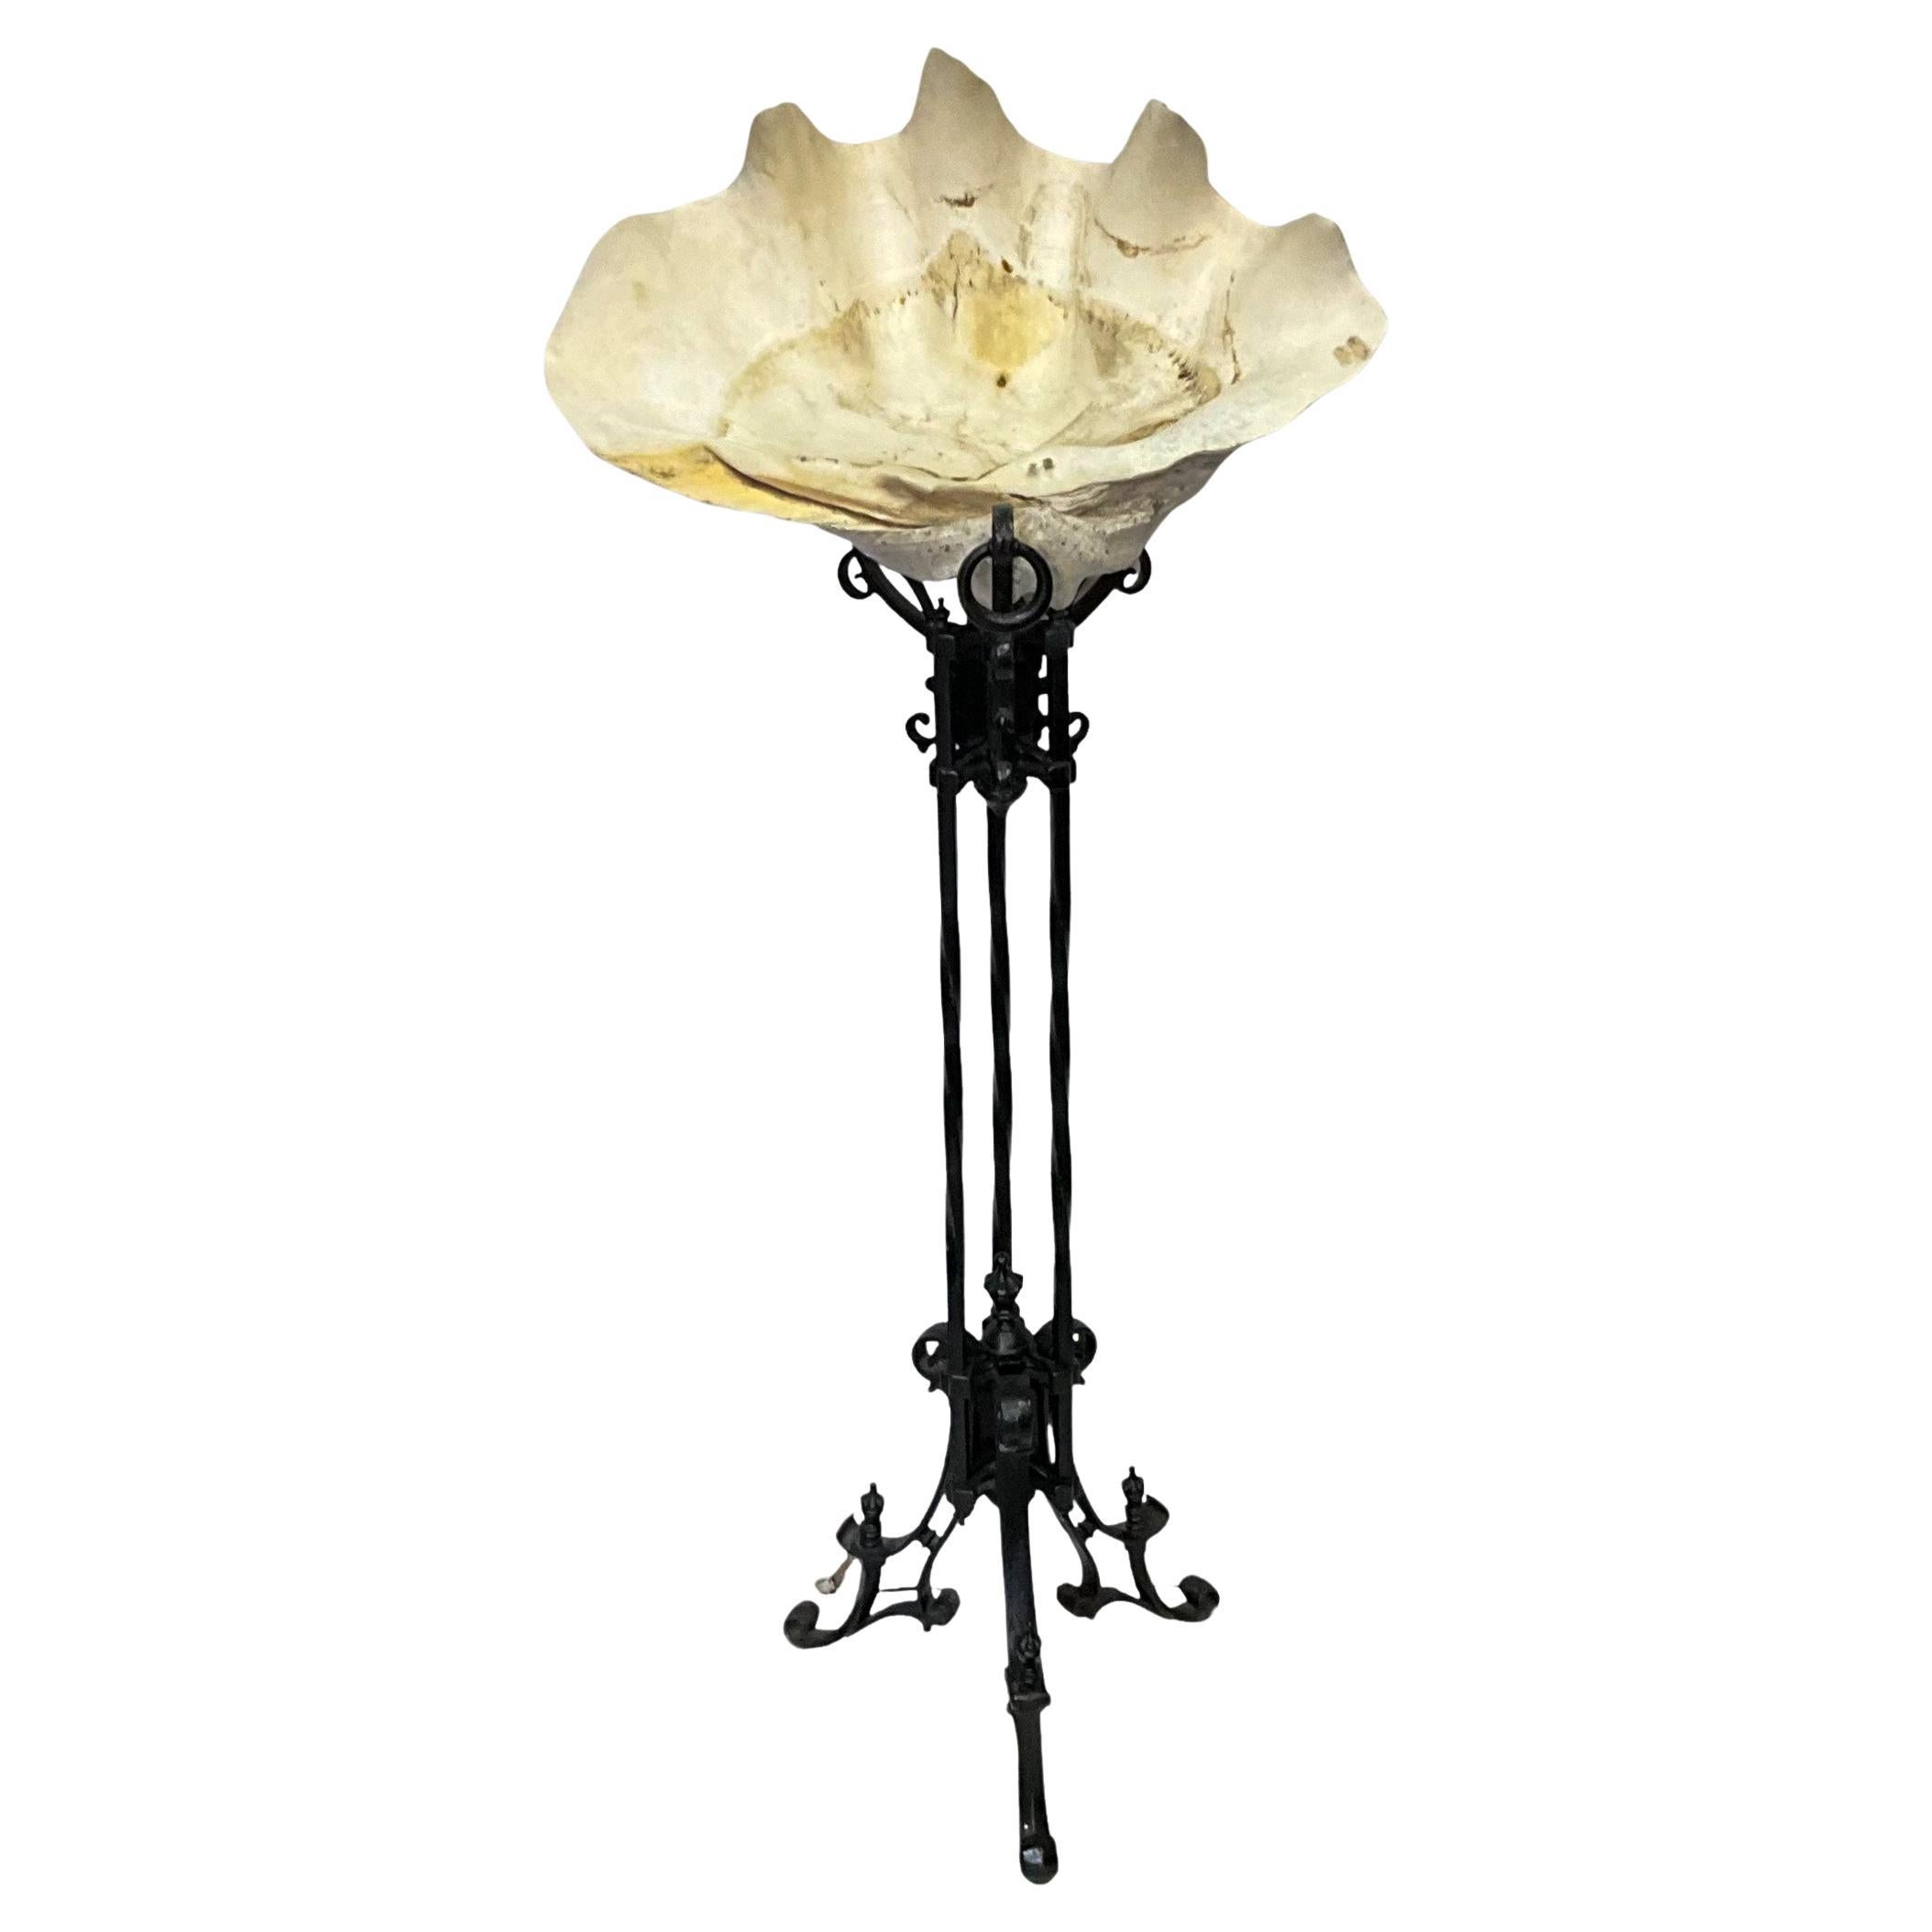 Antique Monumental Clam Shell Resting On Antique Wrought Iron Plant Stand  For Sale